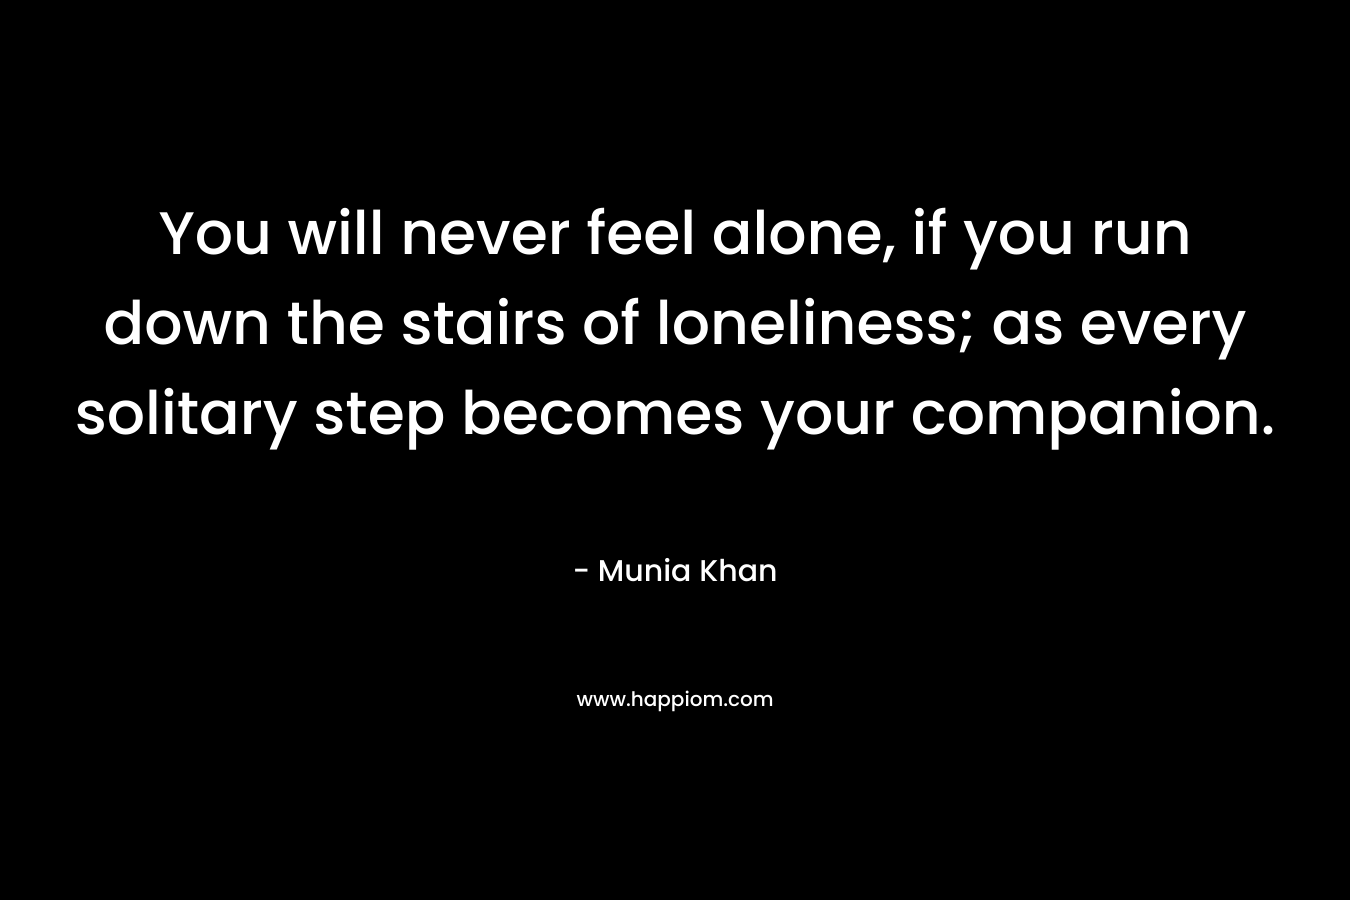 You will never feel alone, if you run down the stairs of loneliness; as every solitary step becomes your companion. – Munia Khan